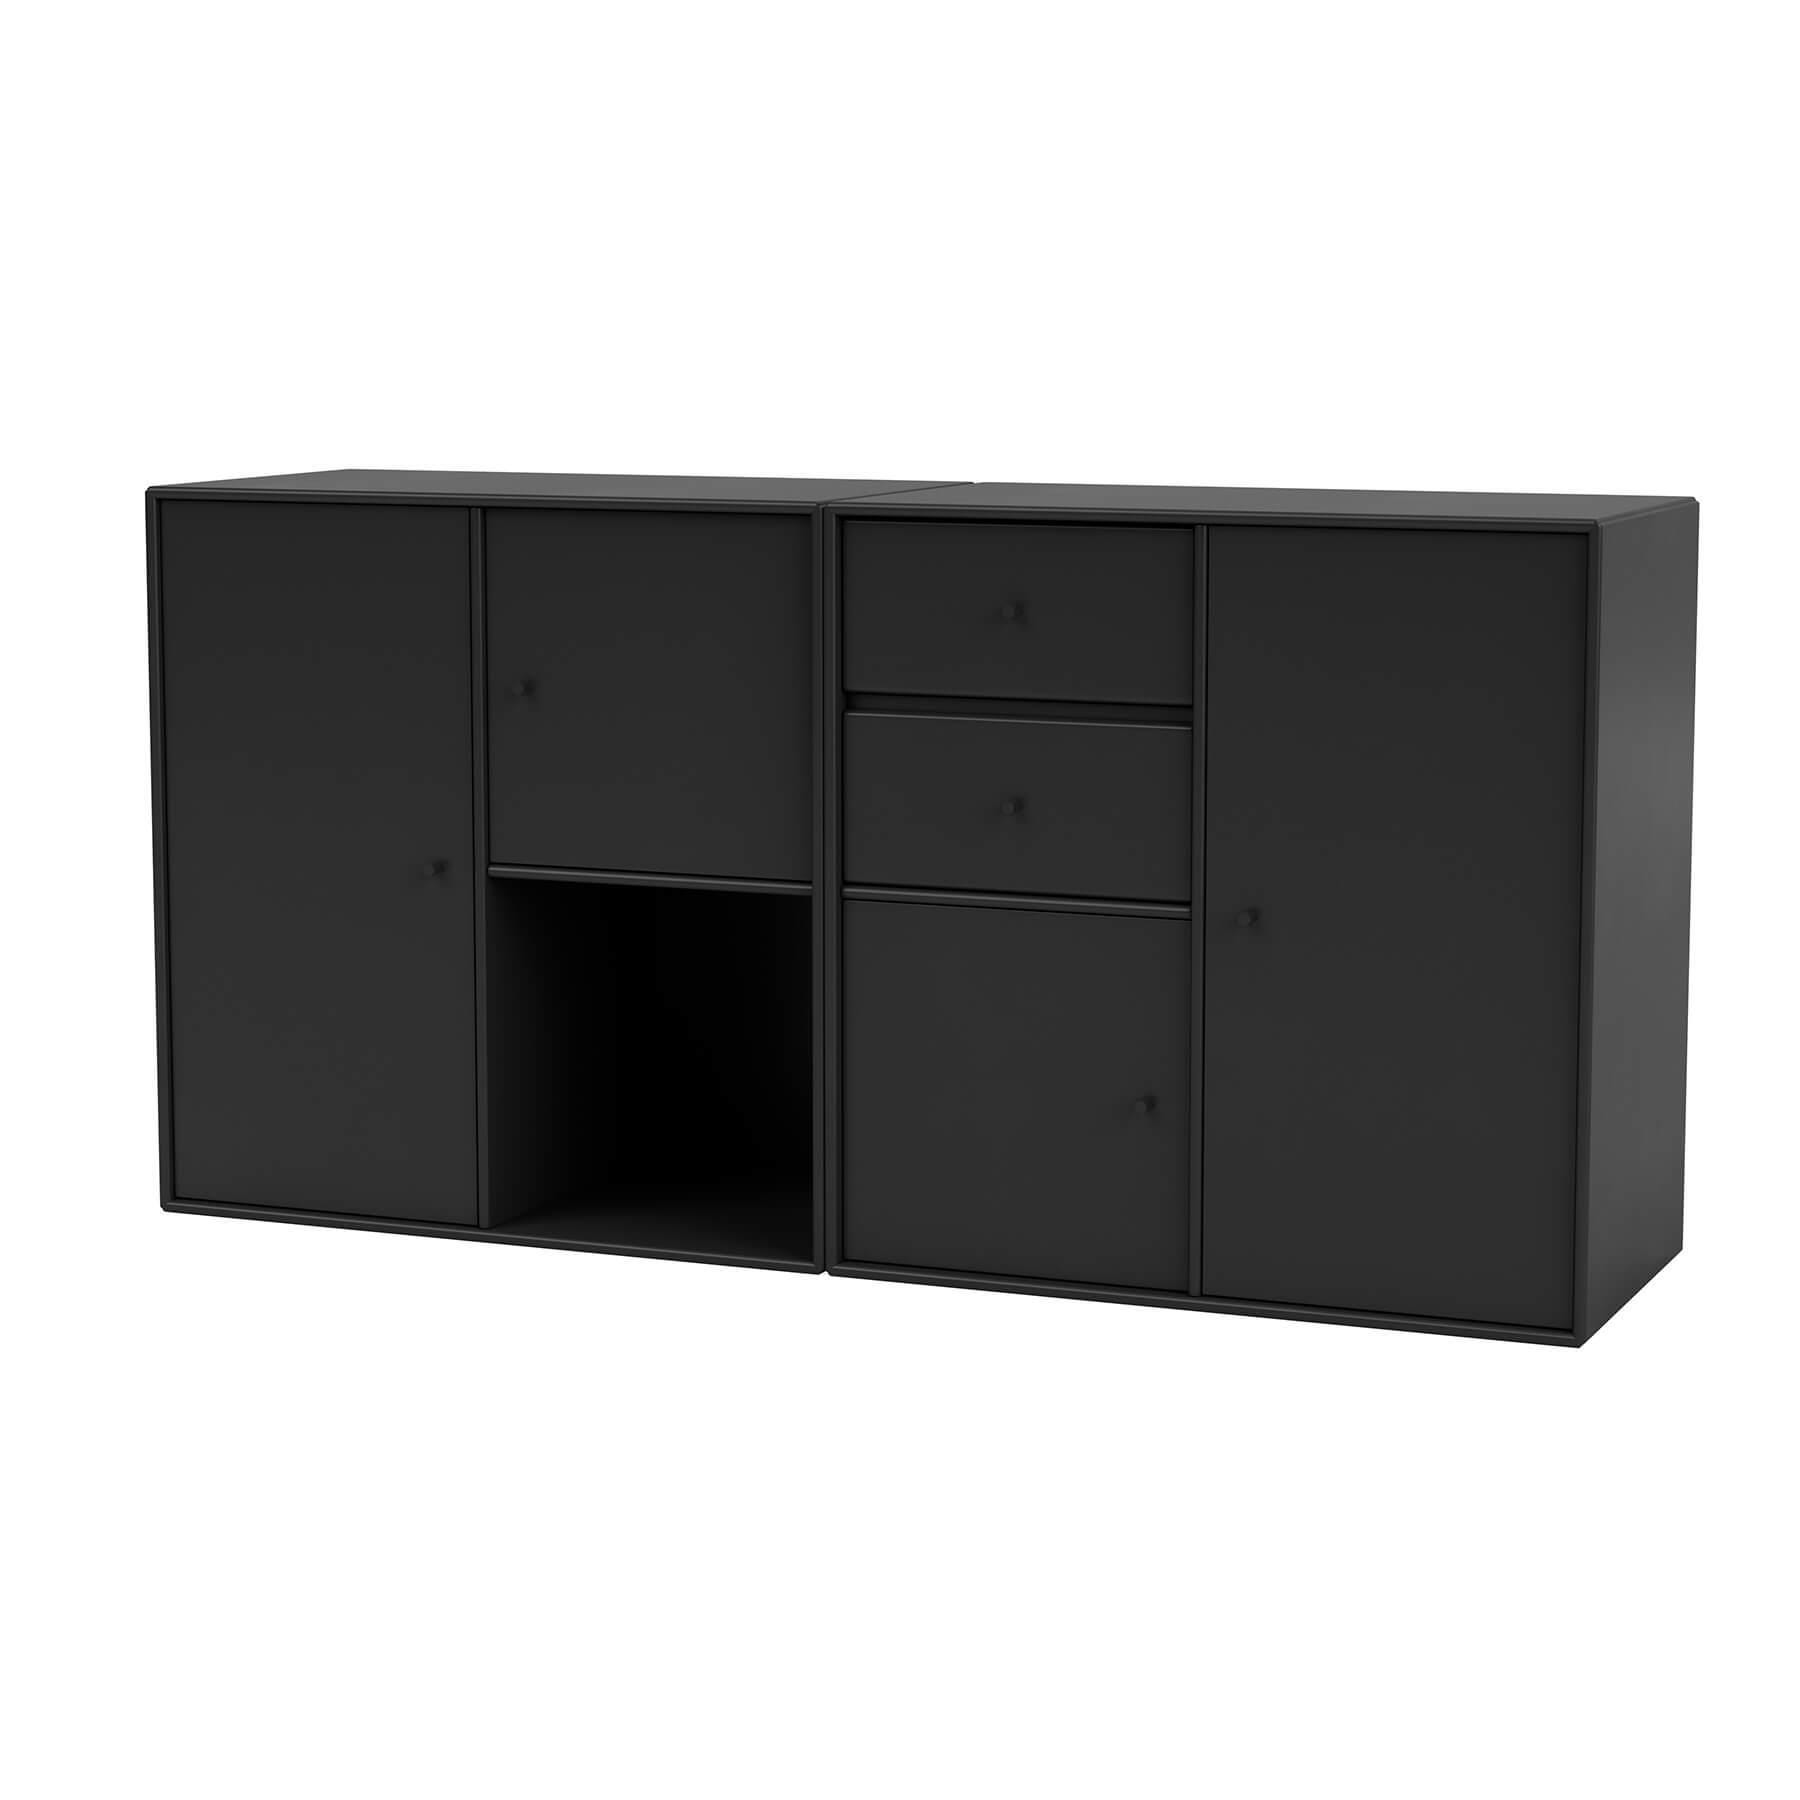 Montana Couple Sideboard Black Wall Mounted Black Designer Furniture From Holloways Of Ludlow